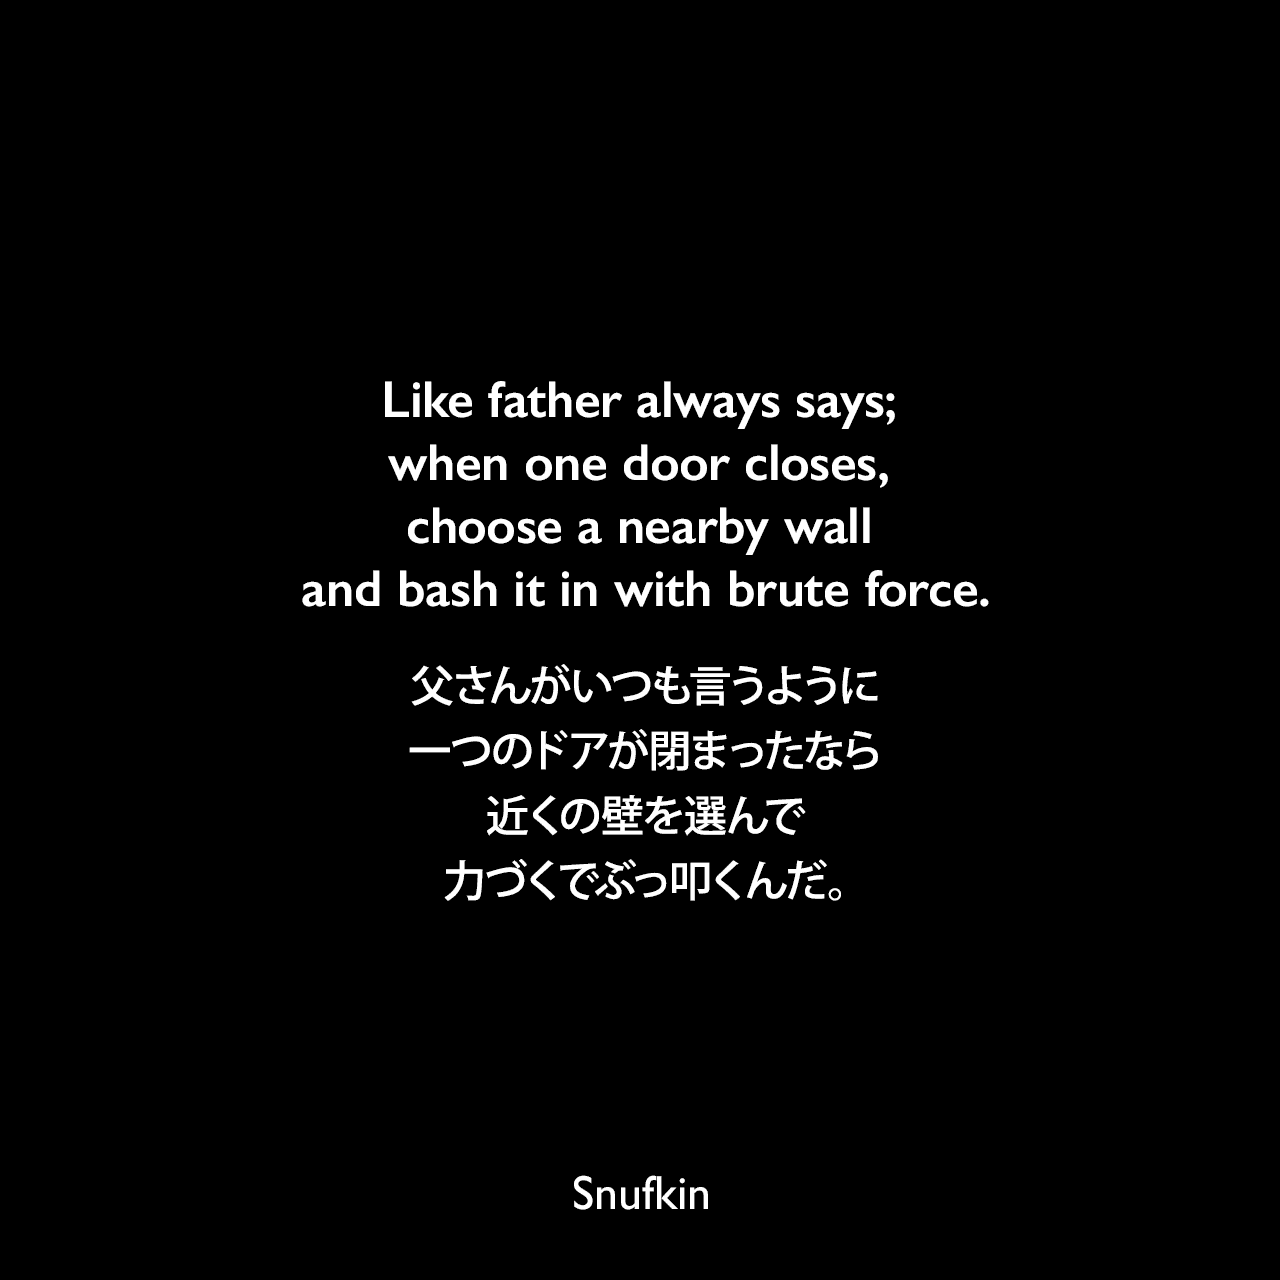 Like father always says; when one door closes, choose a nearby wall and bash it in with brute force.父さんがいつも言うように、一つのドアが閉まったなら近くの壁を選んで力づくでぶっ叩くんだ。Snufkin